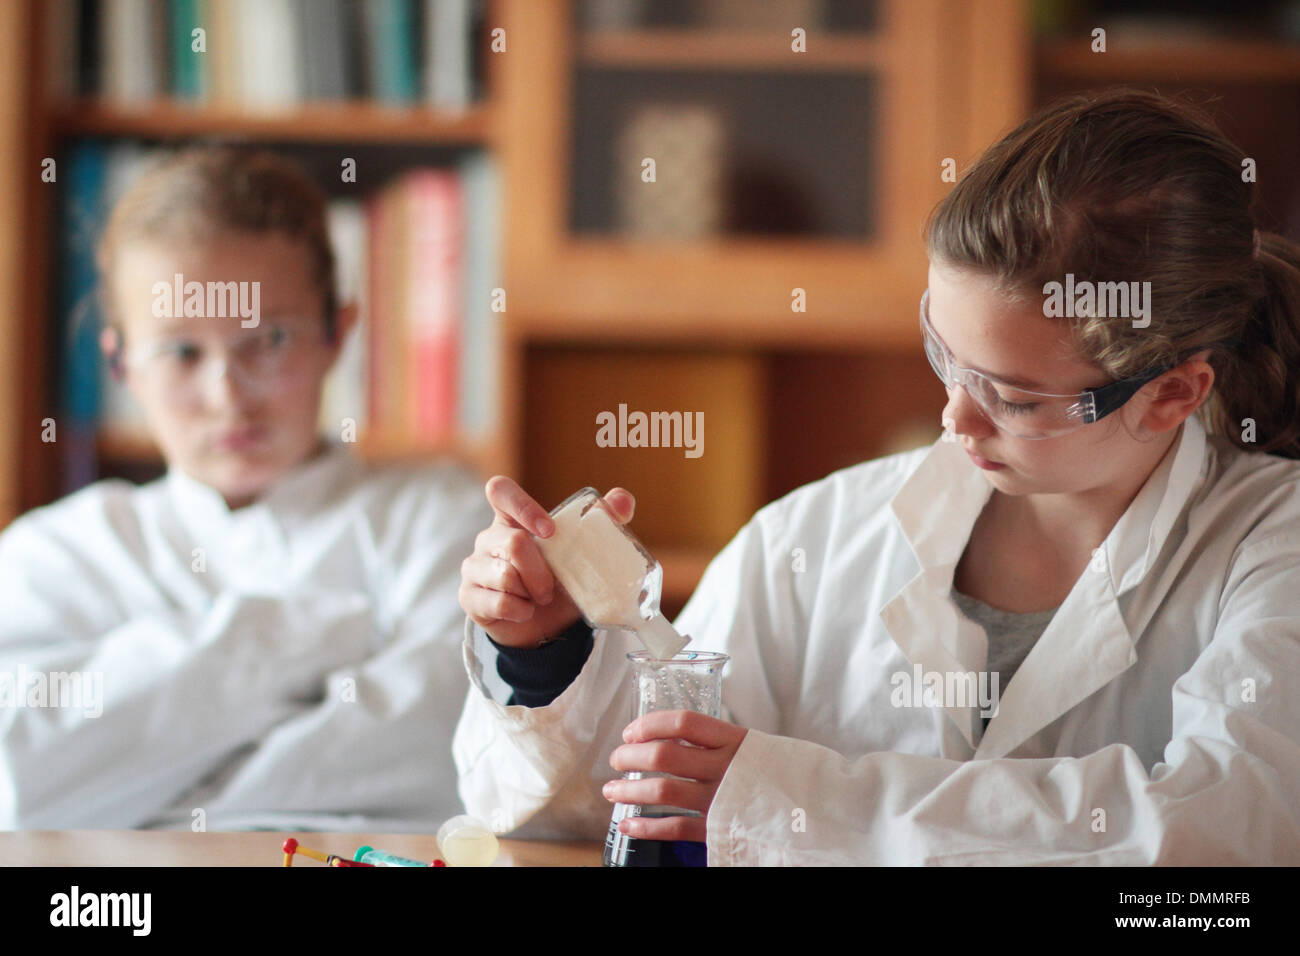 pupils girls learning science chemistry Stock Photo